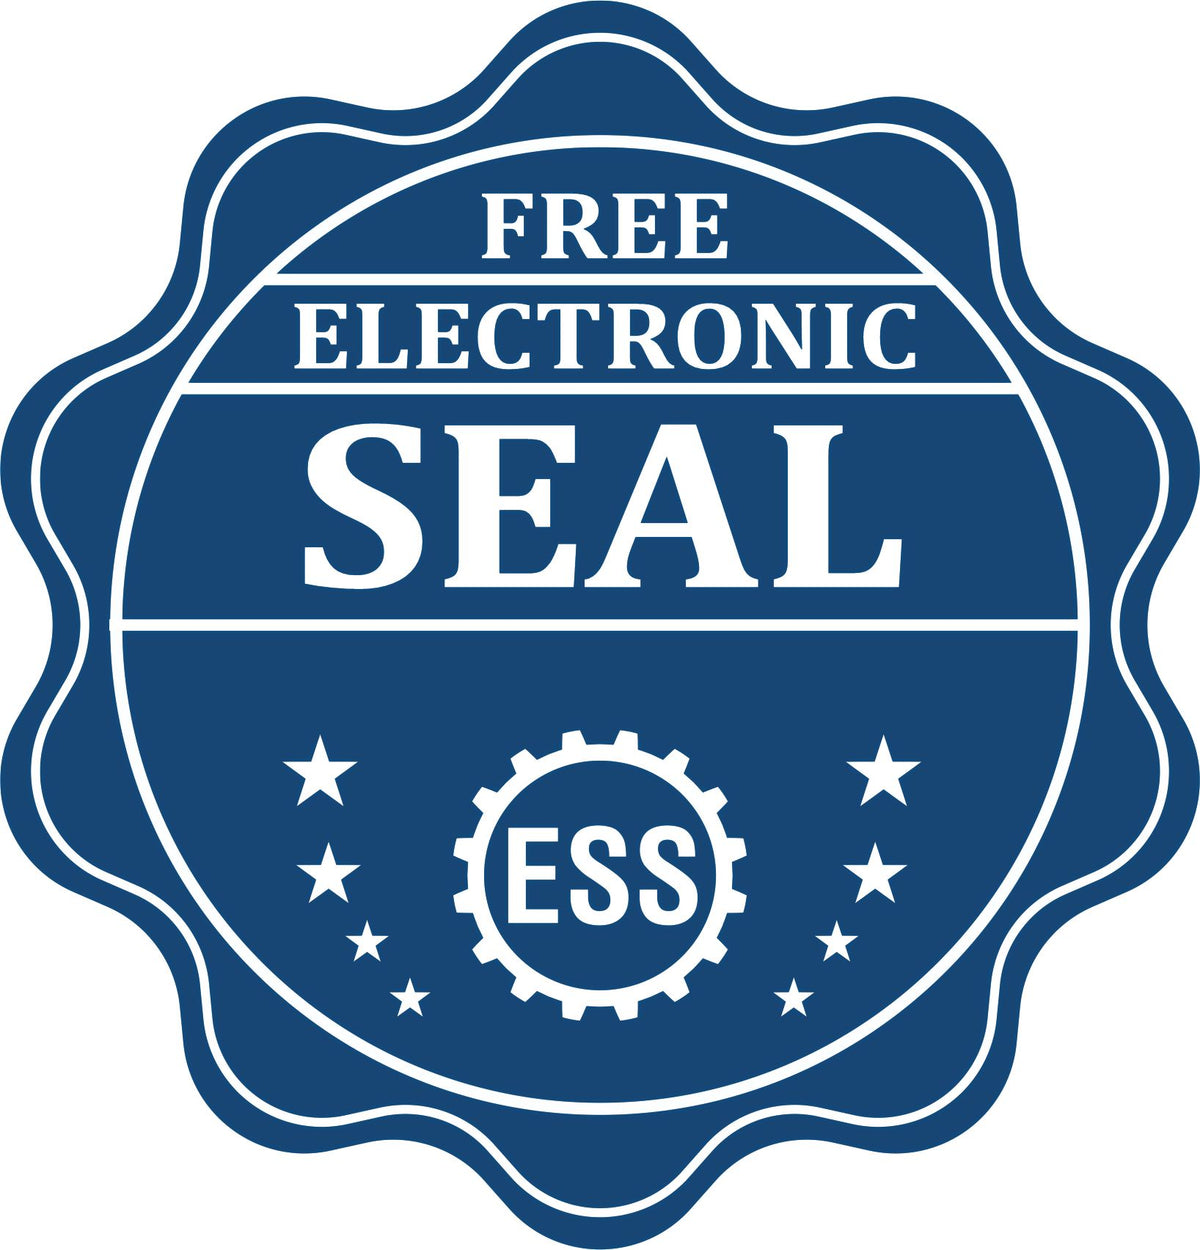 A badge showing a free electronic seal for the Heavy Duty Cast Iron Massachusetts Geologist Seal Embosser with stars and the ESS gear on the emblem.